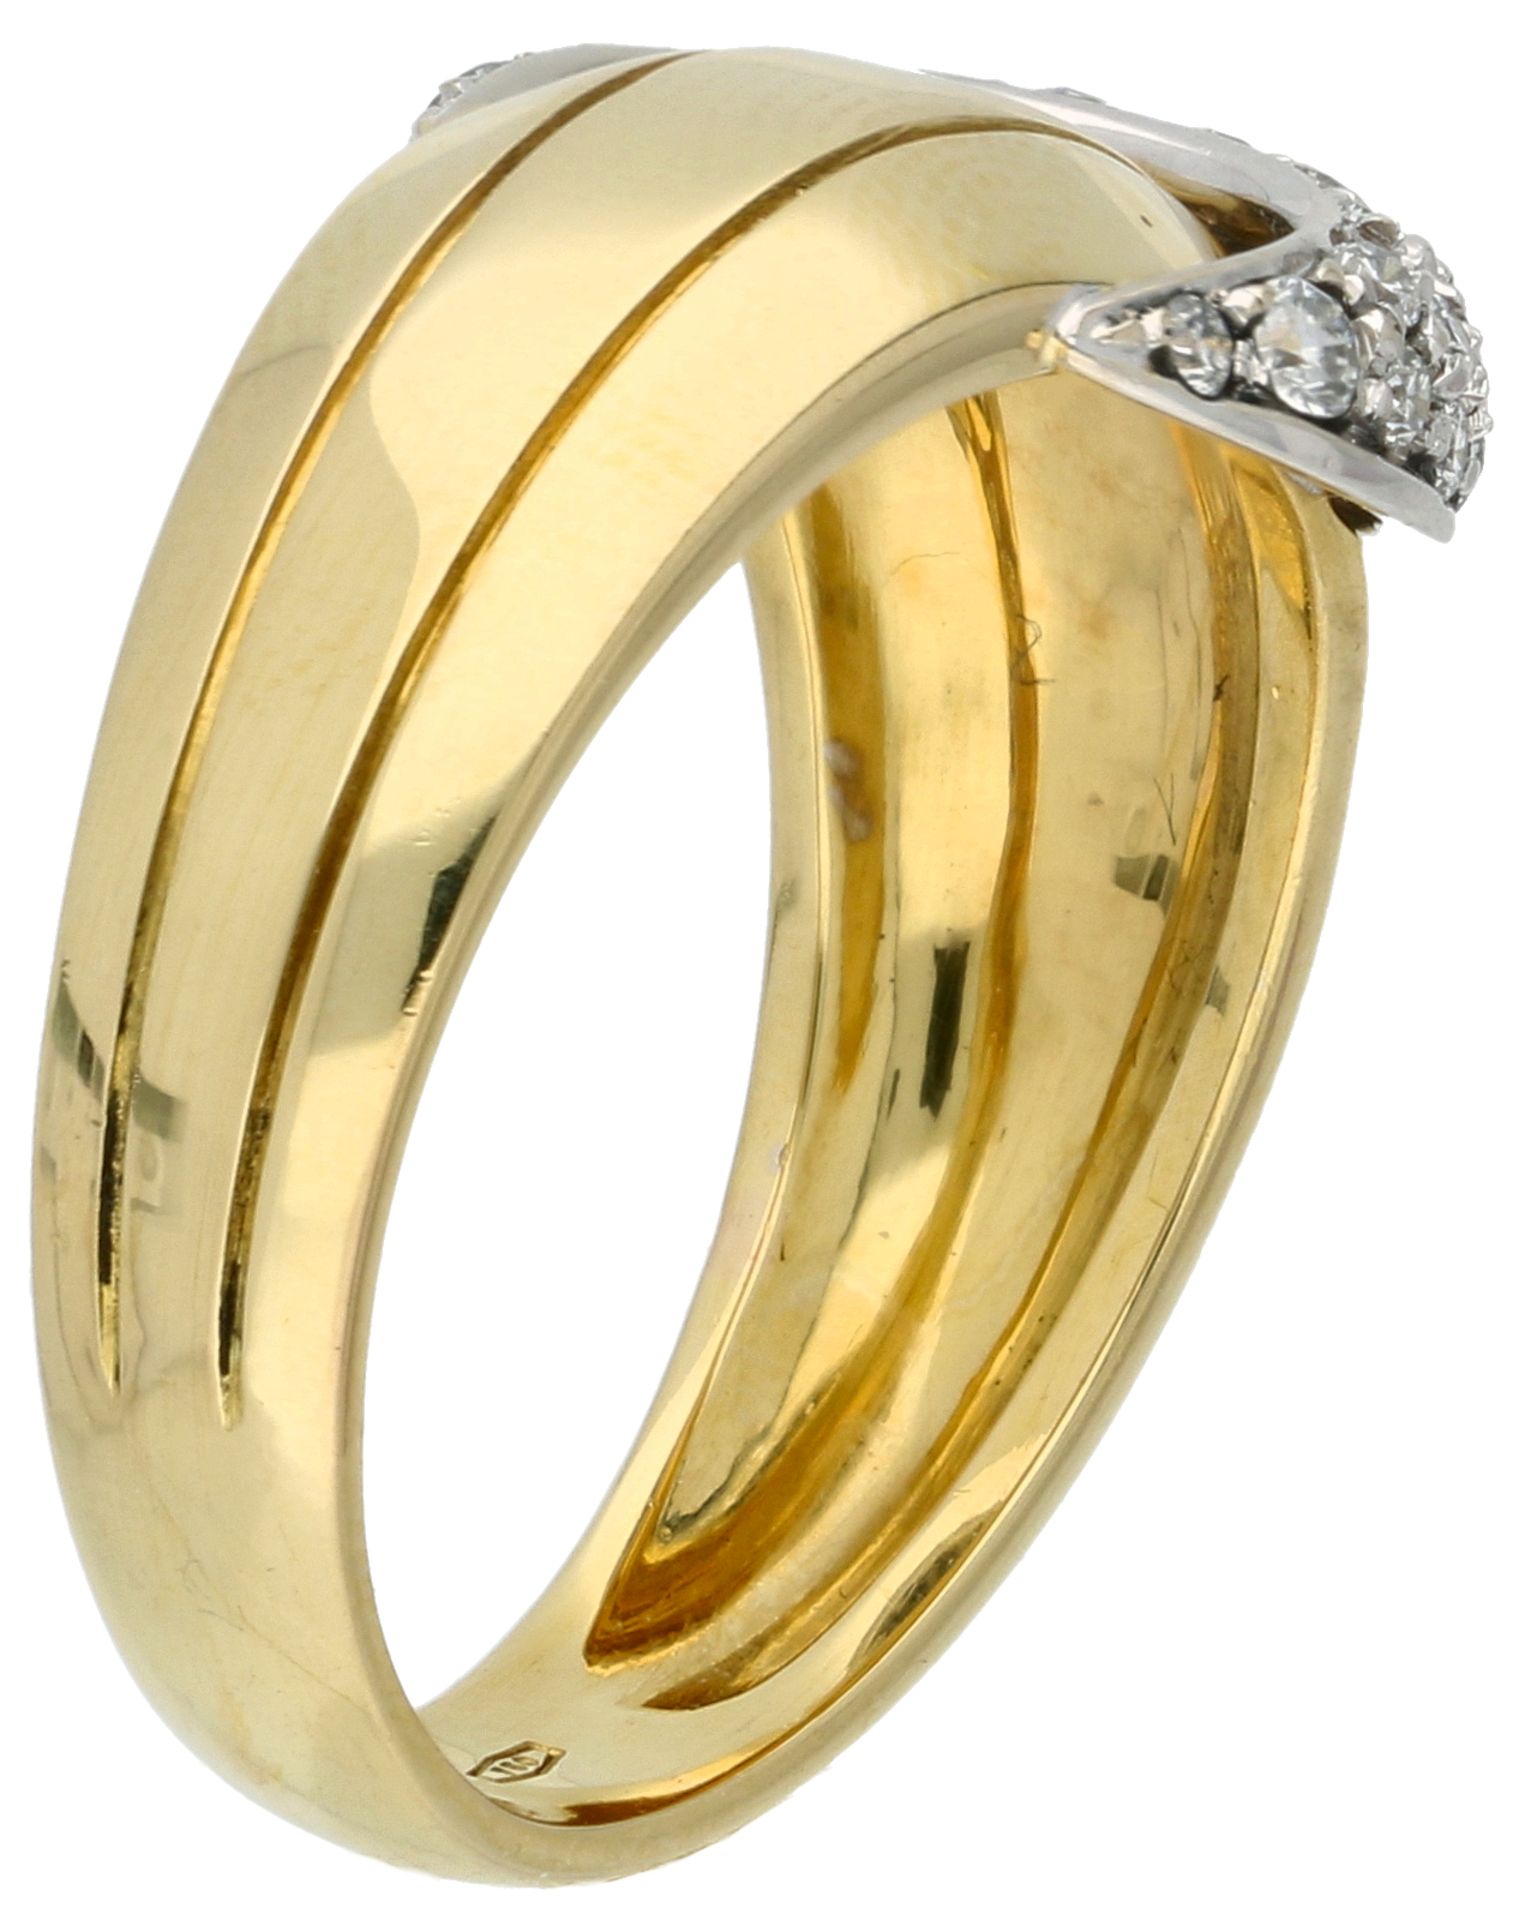 Damiani 18K yellow gold half moon ring set with approx. 0.46 ct diamond. - Image 2 of 4